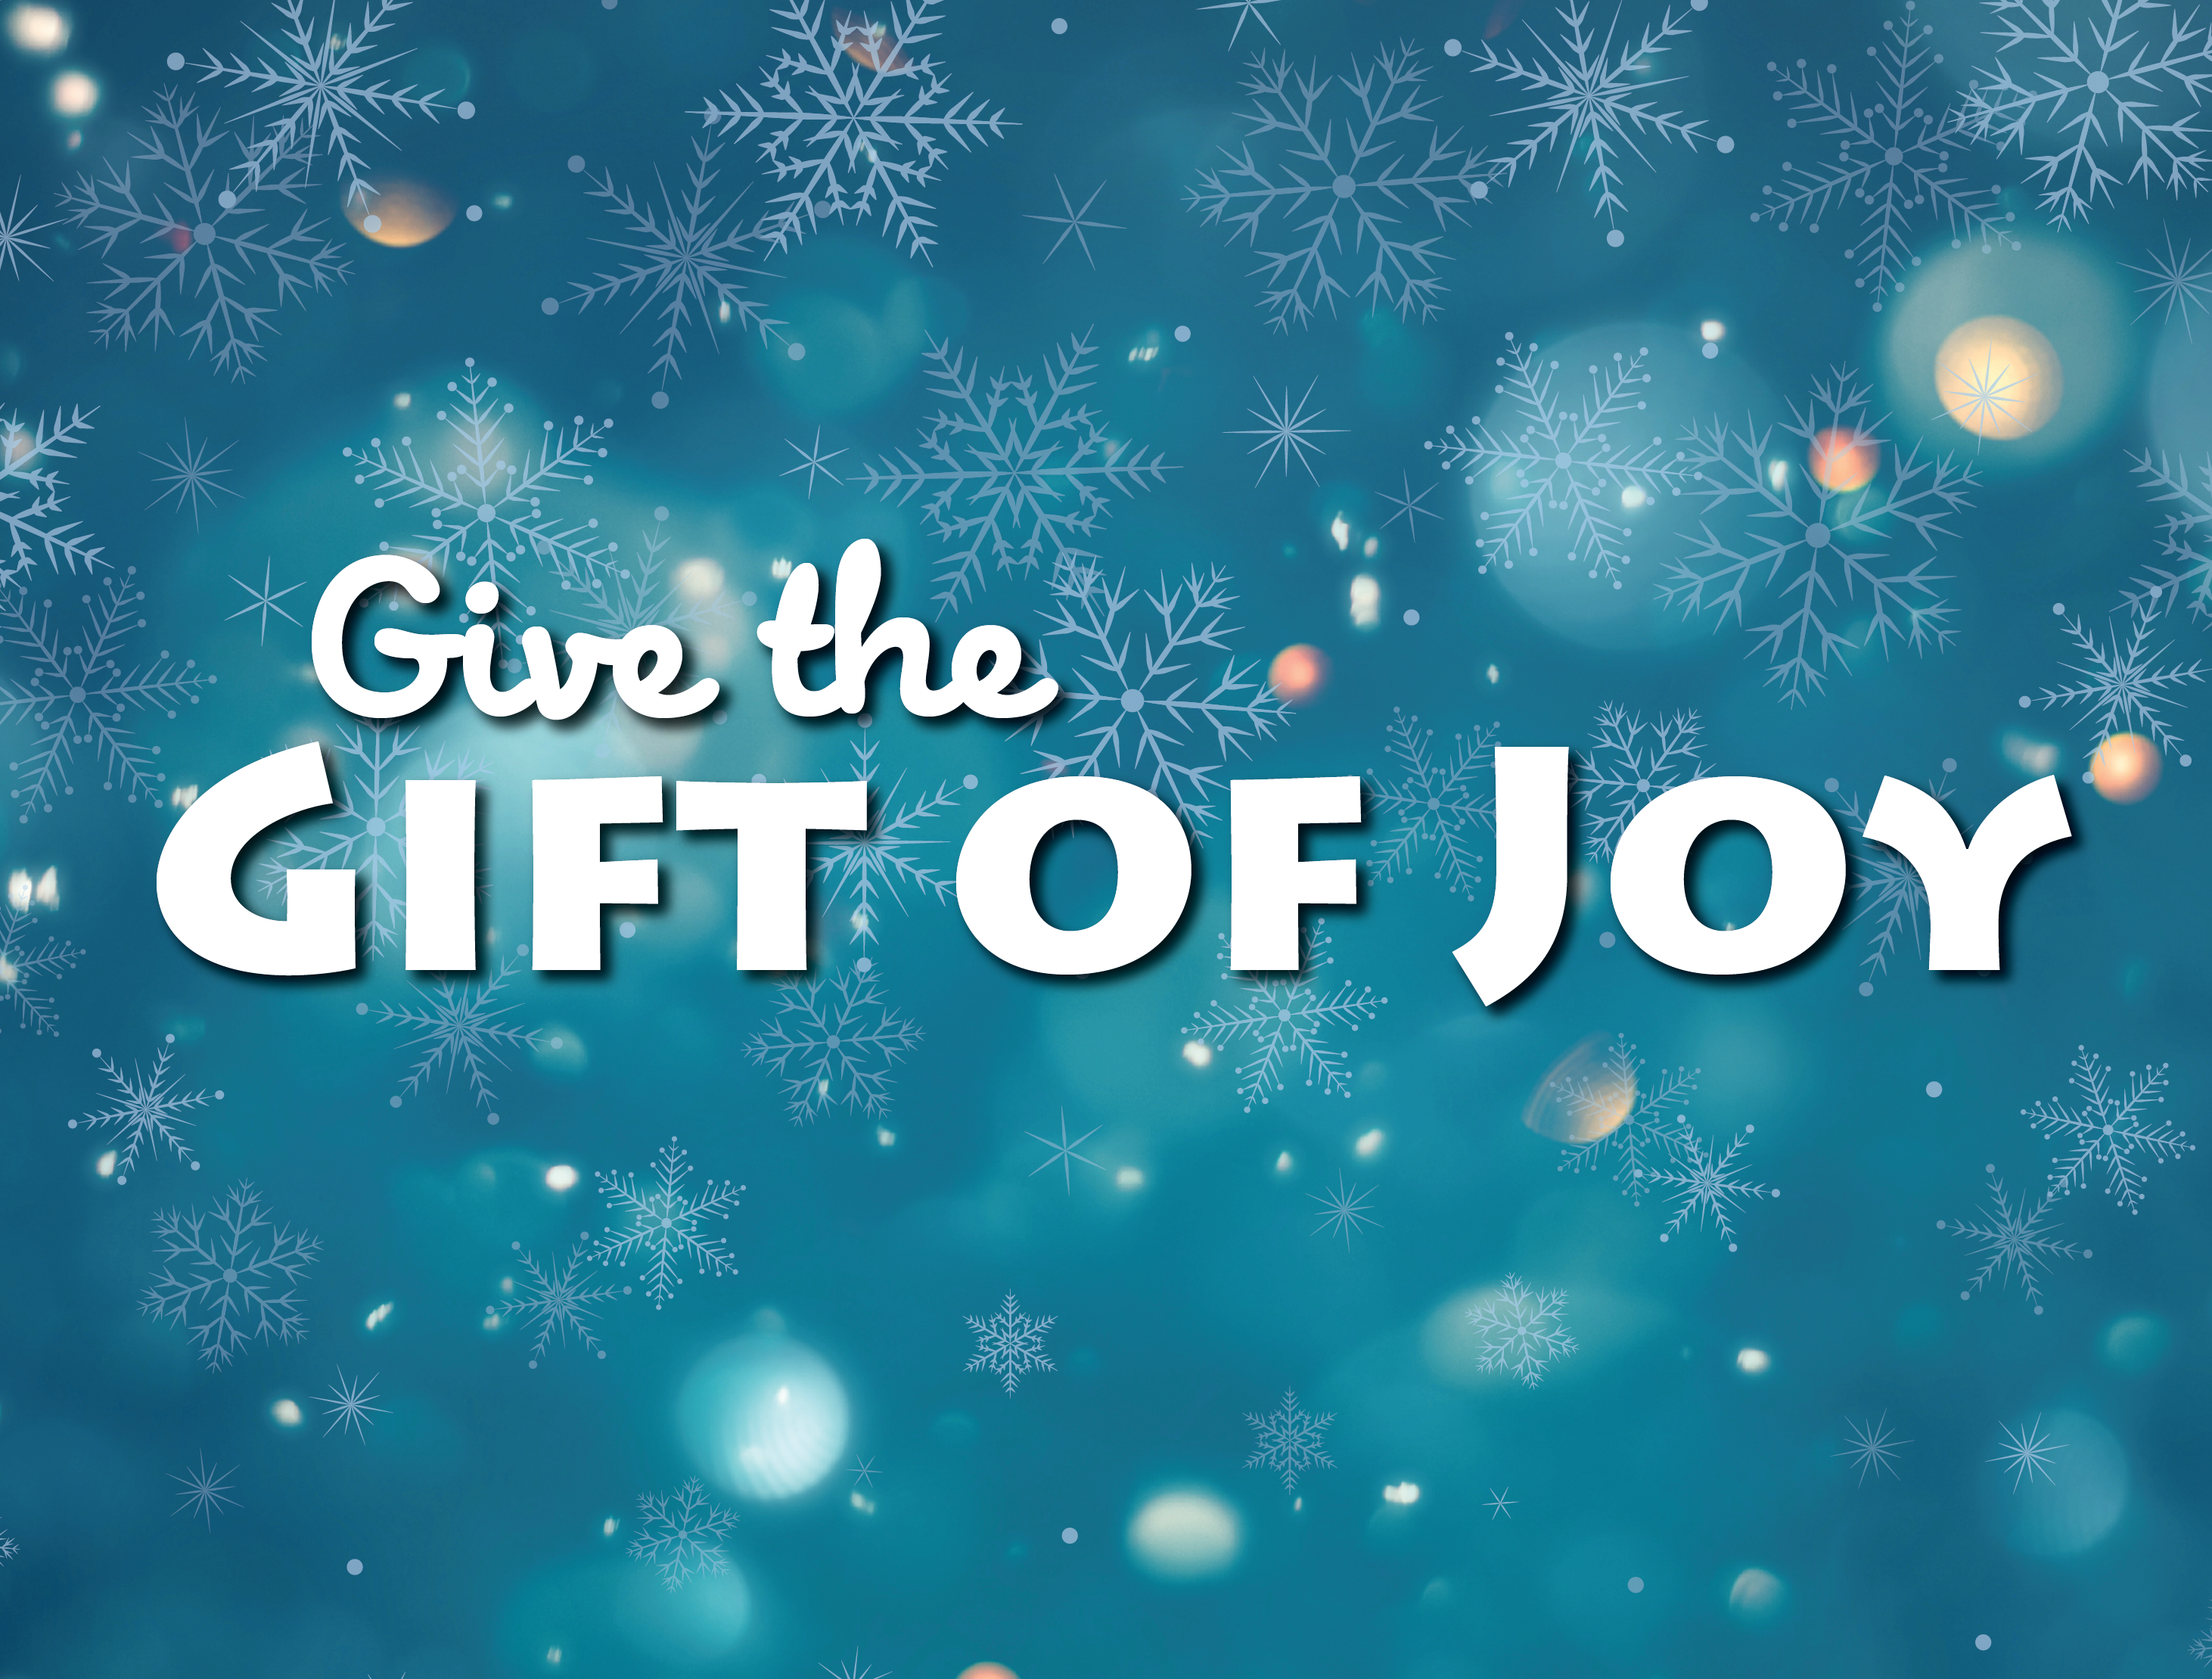 Click to read article: Give the Gift of Joy'